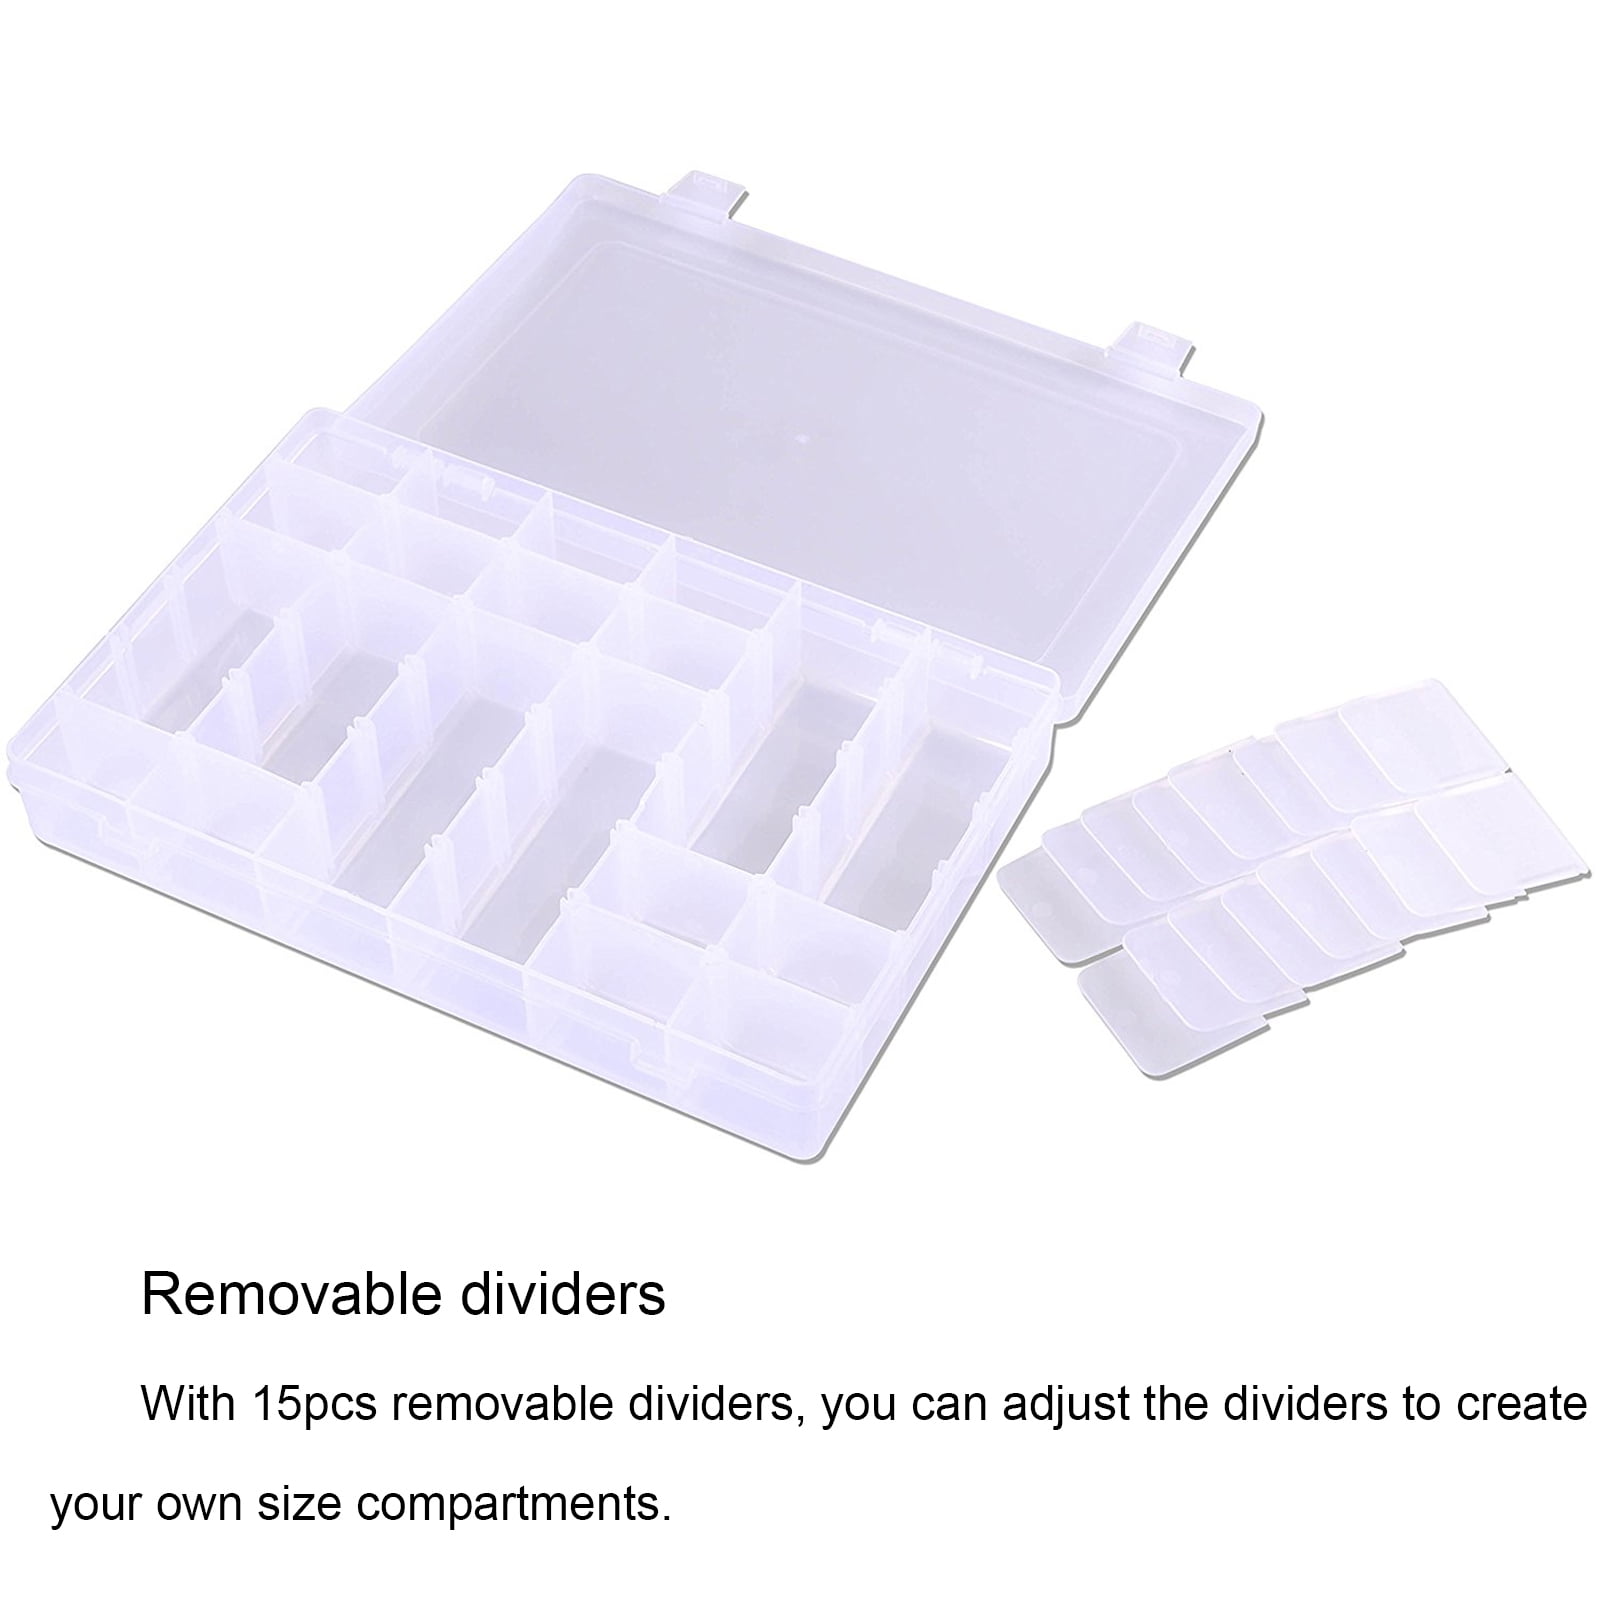 Plastic Compartment Box 35 Grids, Adjustable Dividers, Hanging Hole,  13.6x9.3x2 inch(420.720)_Plastic Storage Case_Tool Organizers_S-TURBO  D.I.Y. & HARDWARE